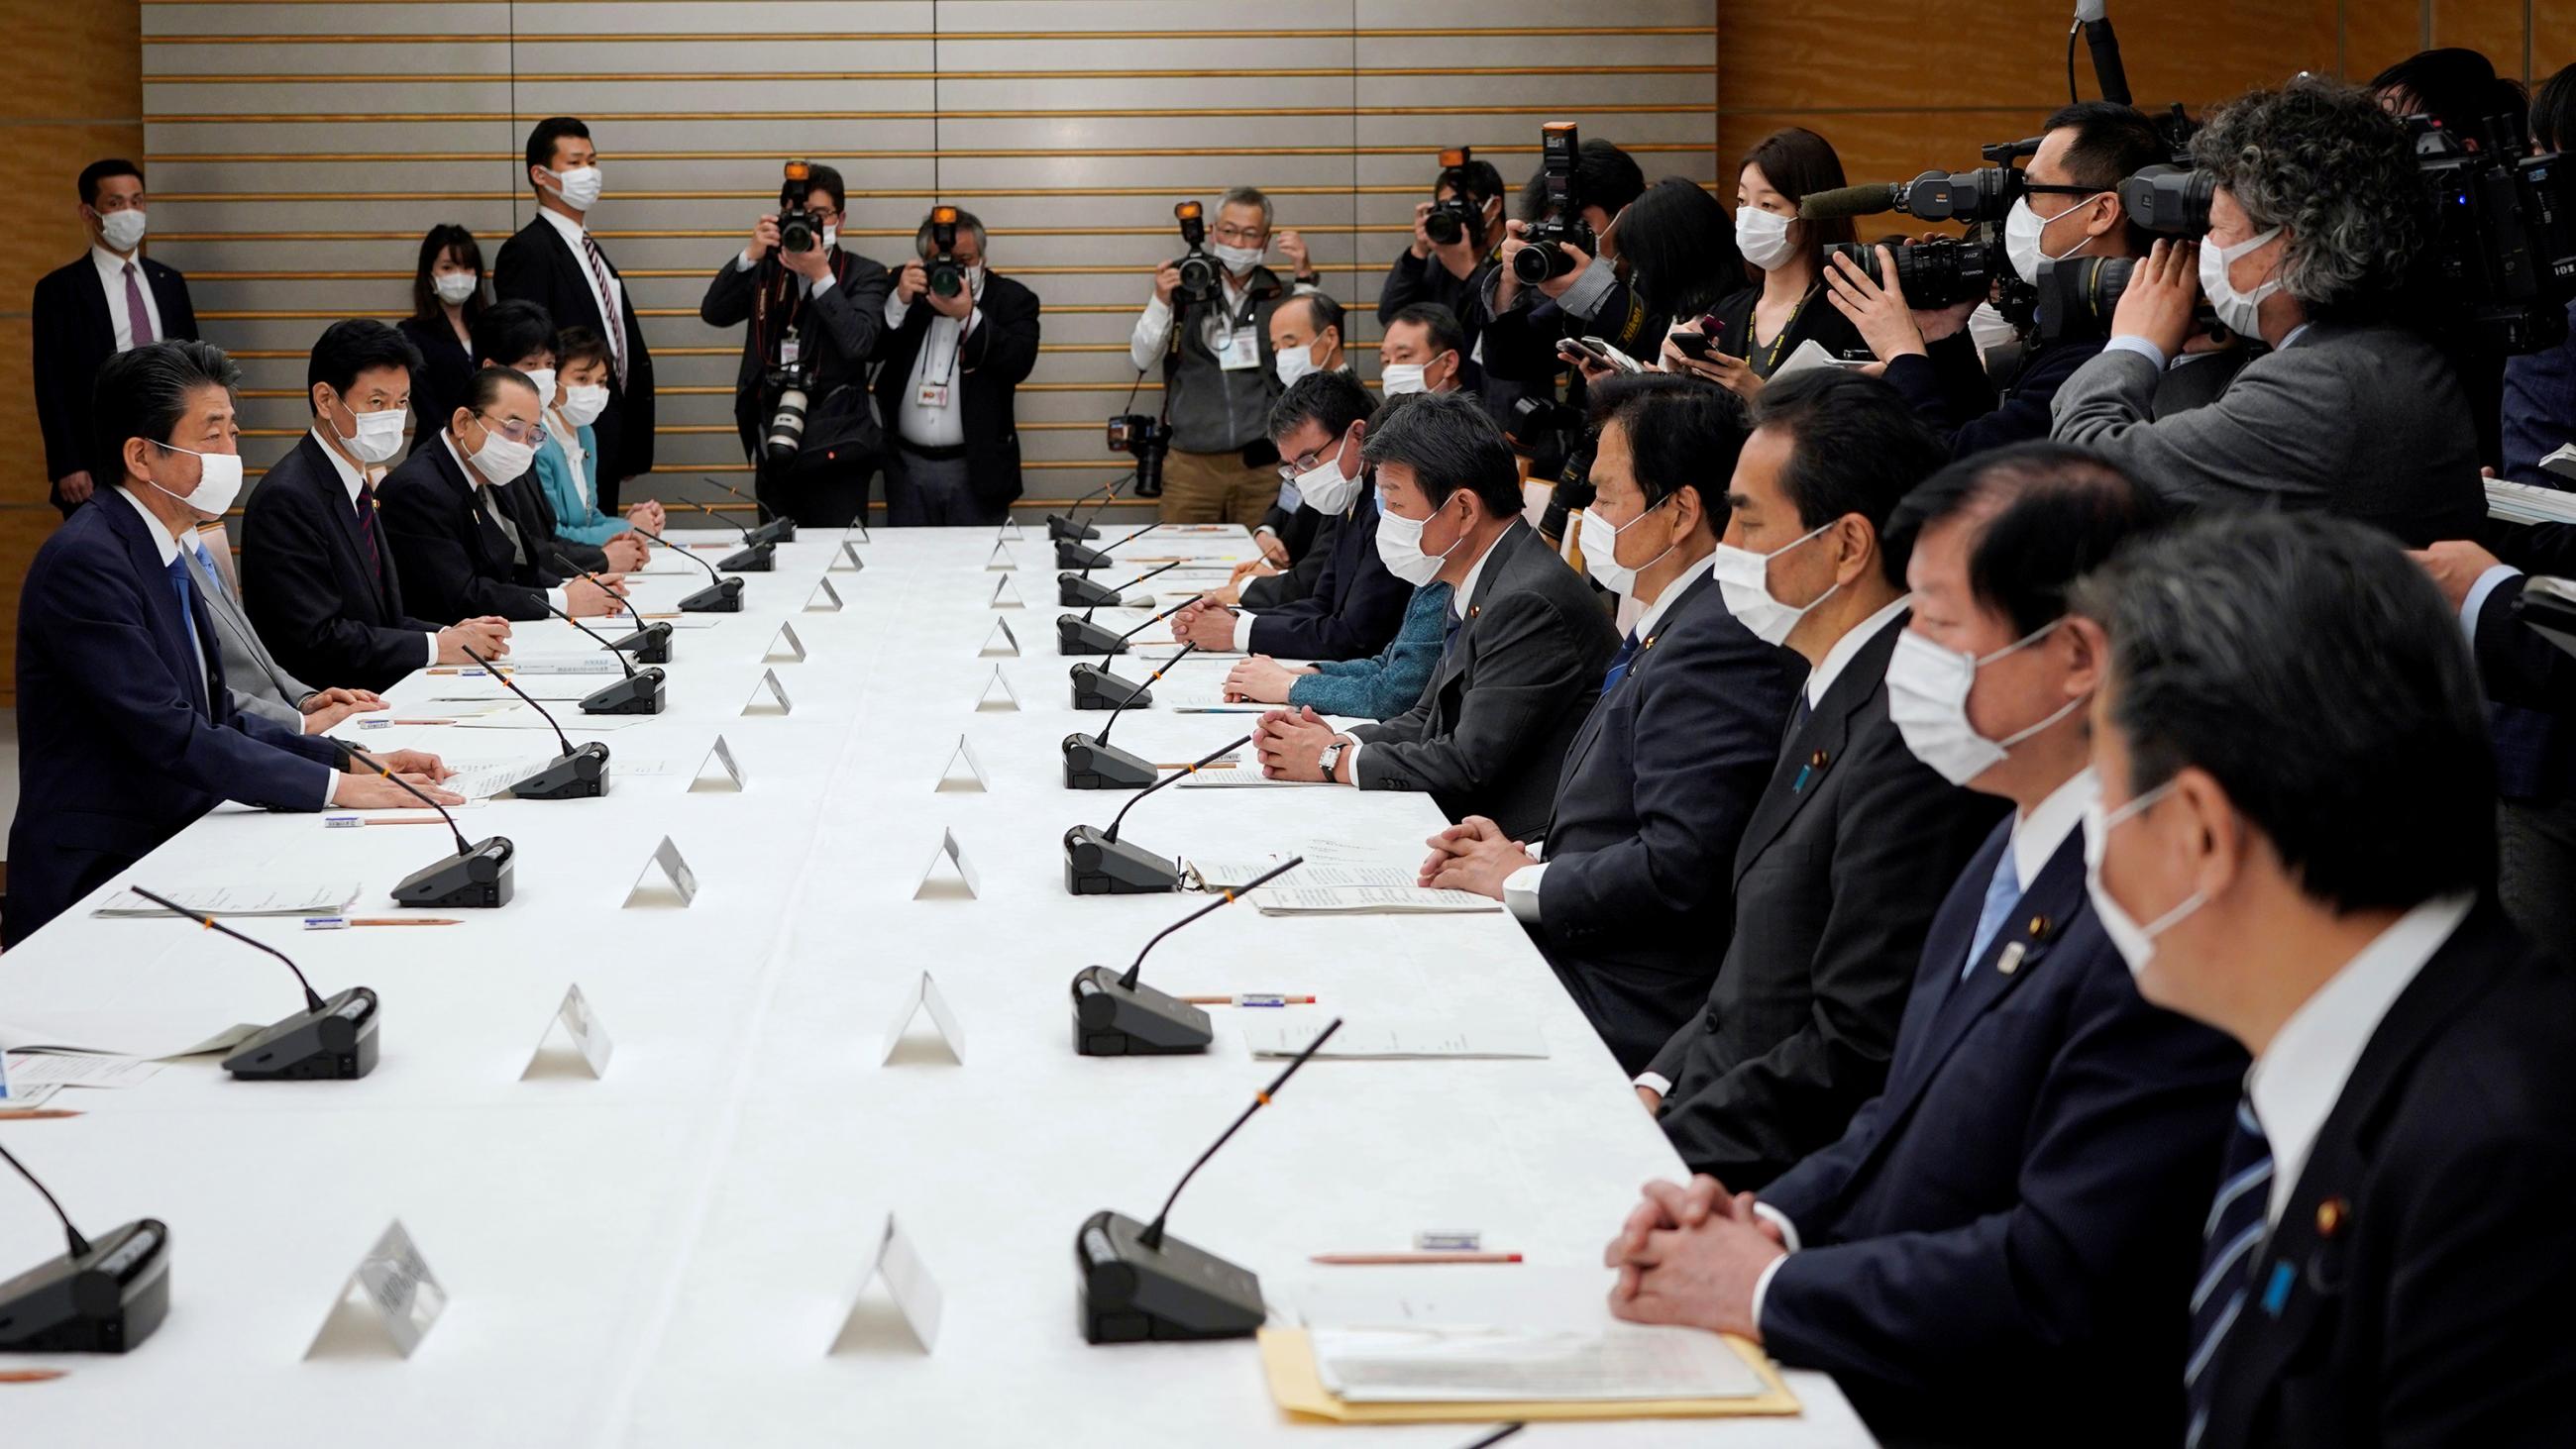 The photo shows the PM and a number of government ministers sitting around a large table. Reporters are seen at the edge of the frame snapping photos. Everyone in the picture is wearing a mask. 